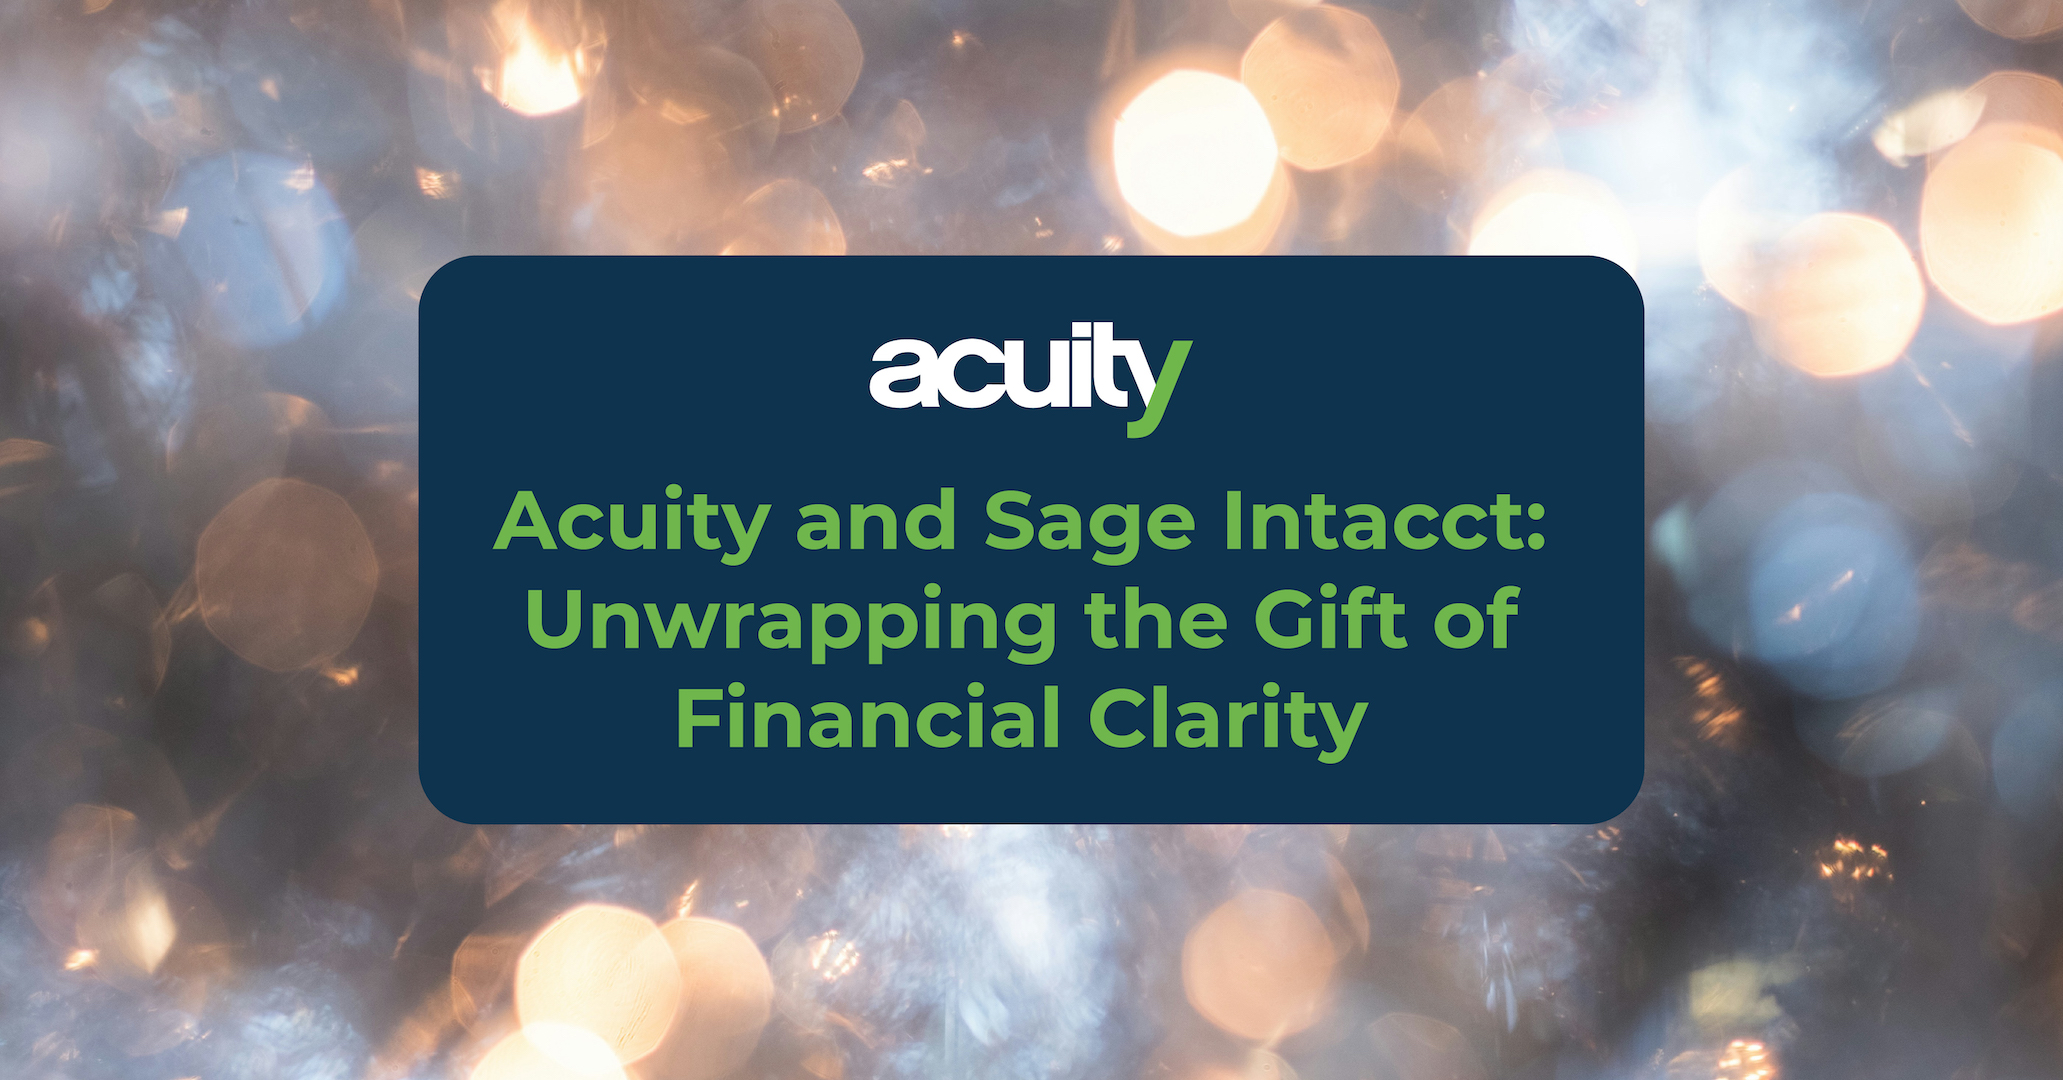 The gift of financial clarity - sage intacct